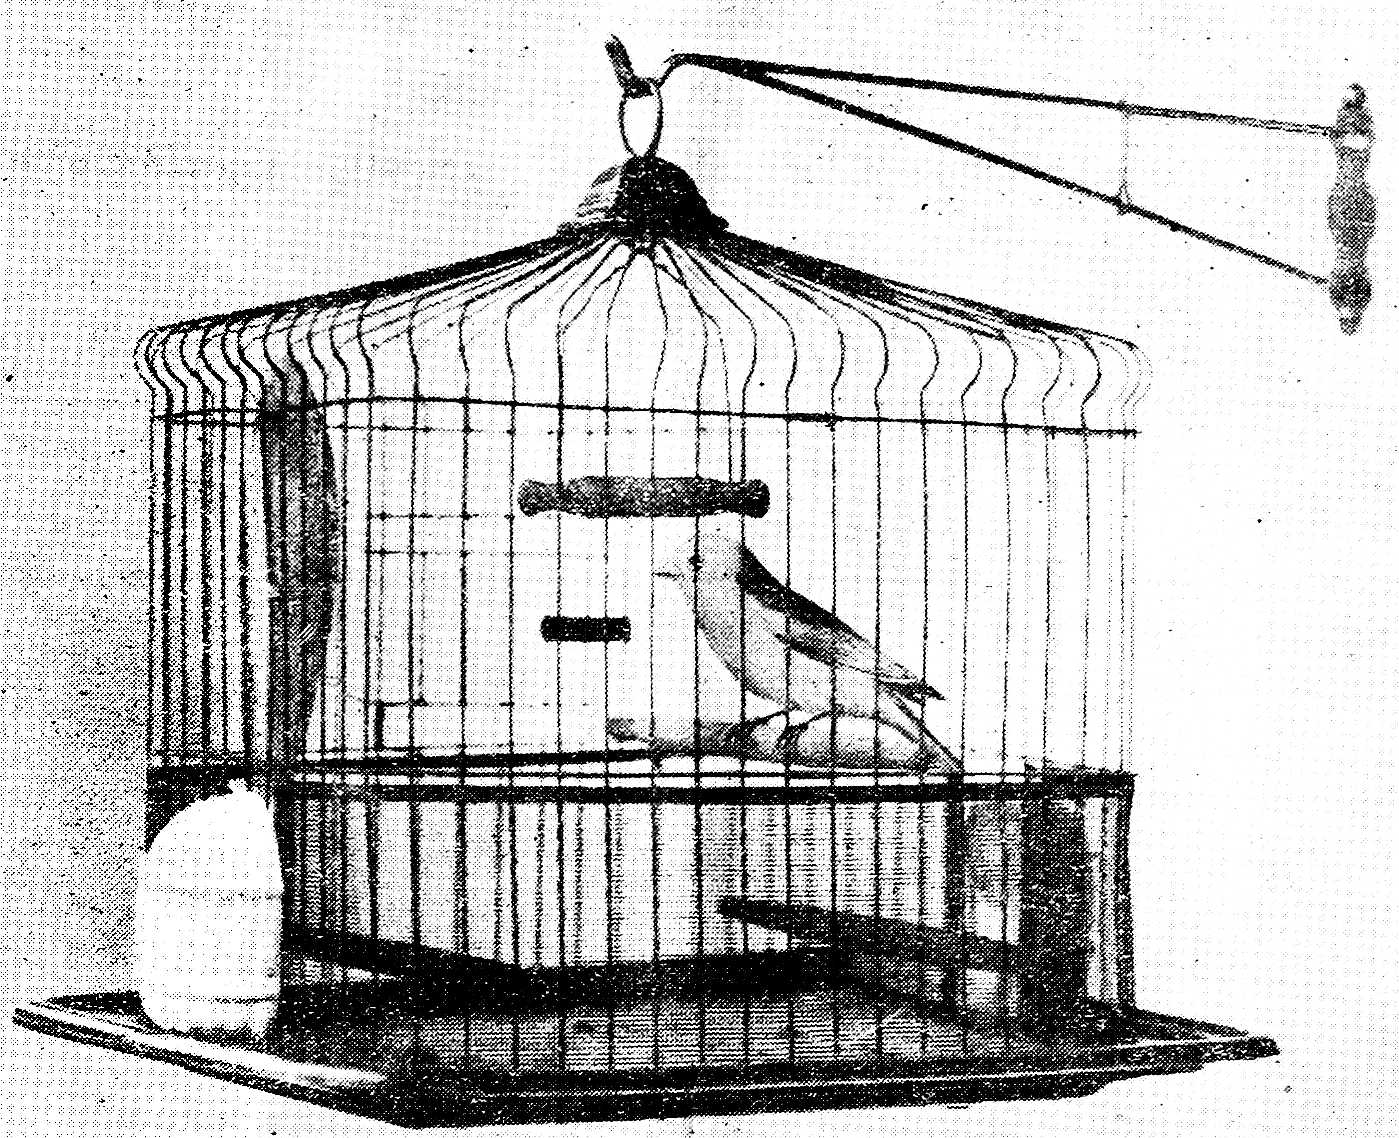 Canary in a bird cage